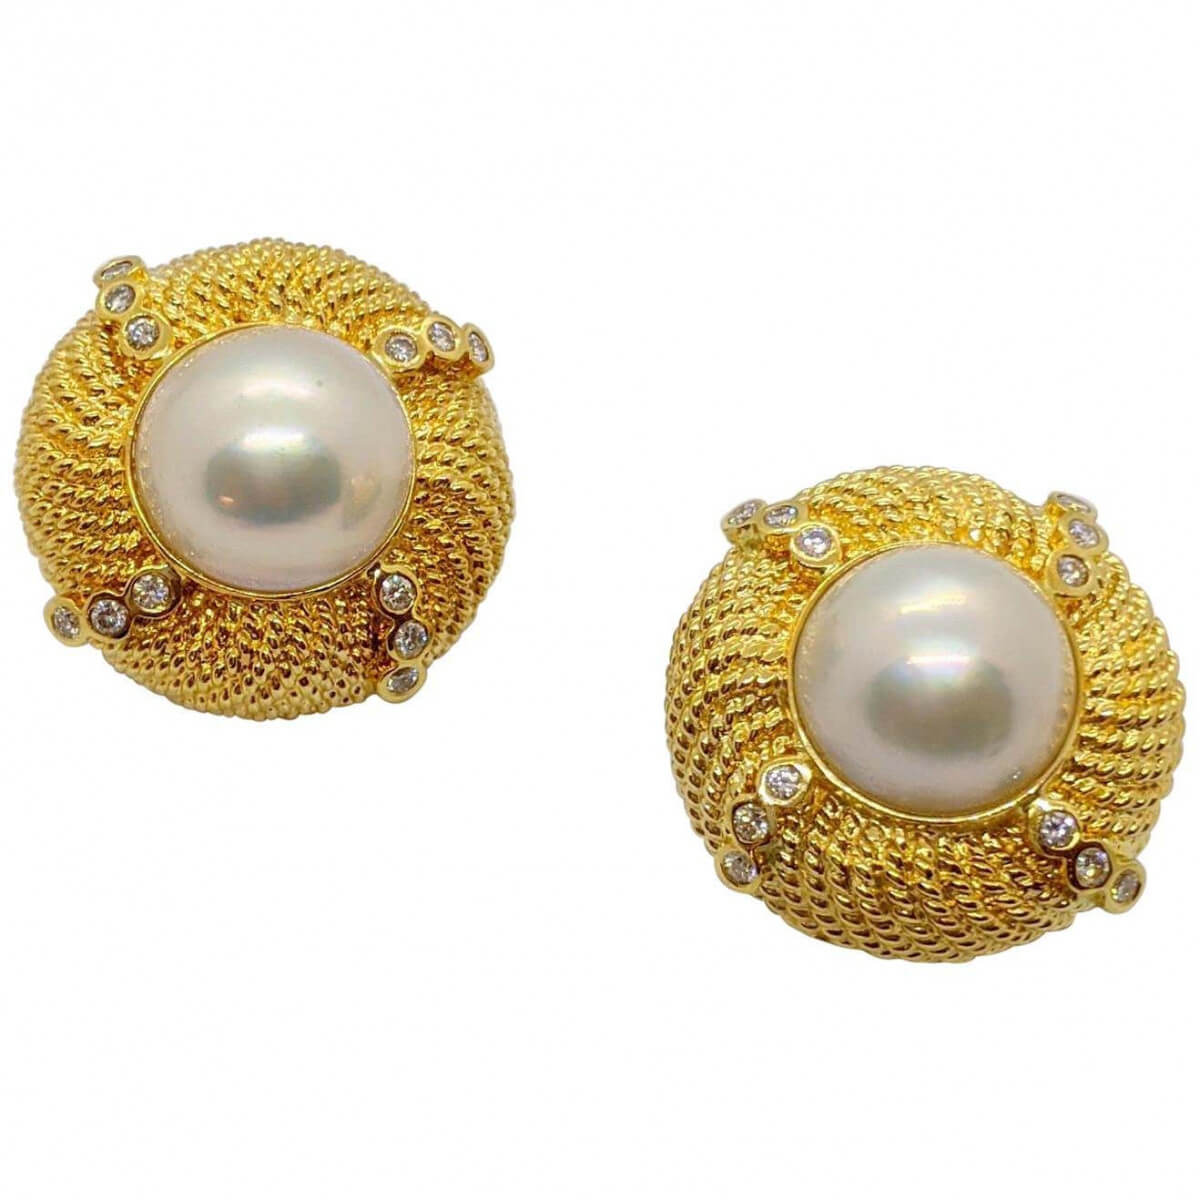 80s jewelry 18-Karat-Yellow-Gold-Mabe-Pearl-Button-Earrings-with-72-Carat-Diamonds